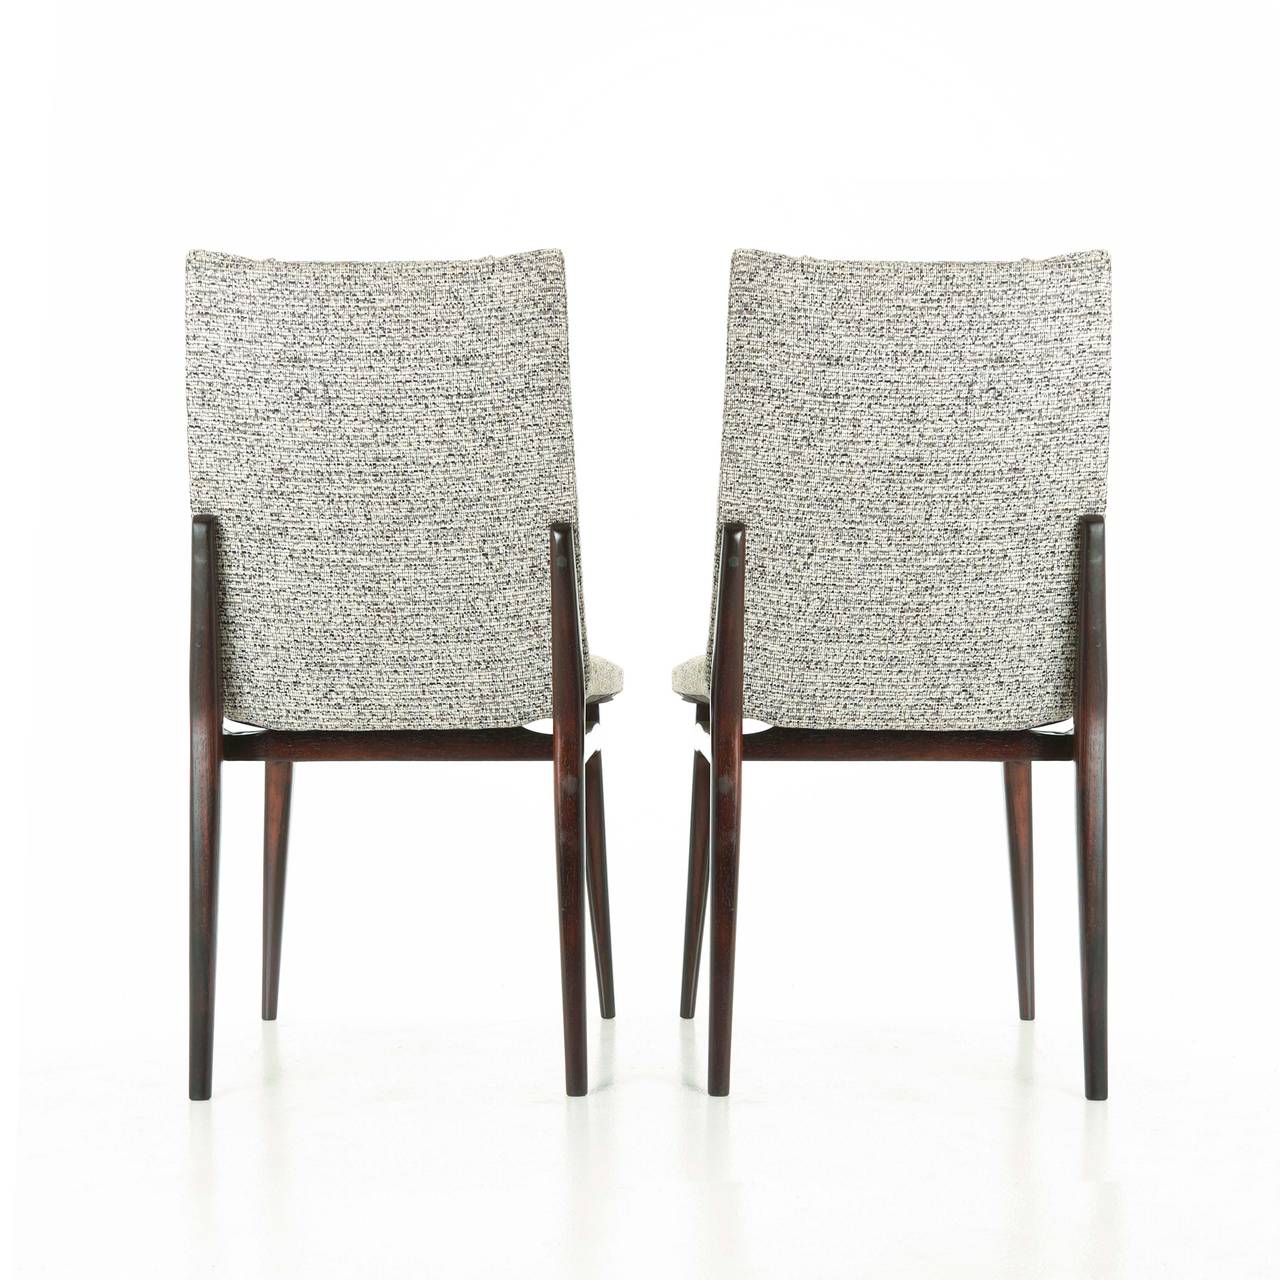 Mid-20th Century Mid-Century Brazilian Side Chairs with Gray Upholstery For Sale